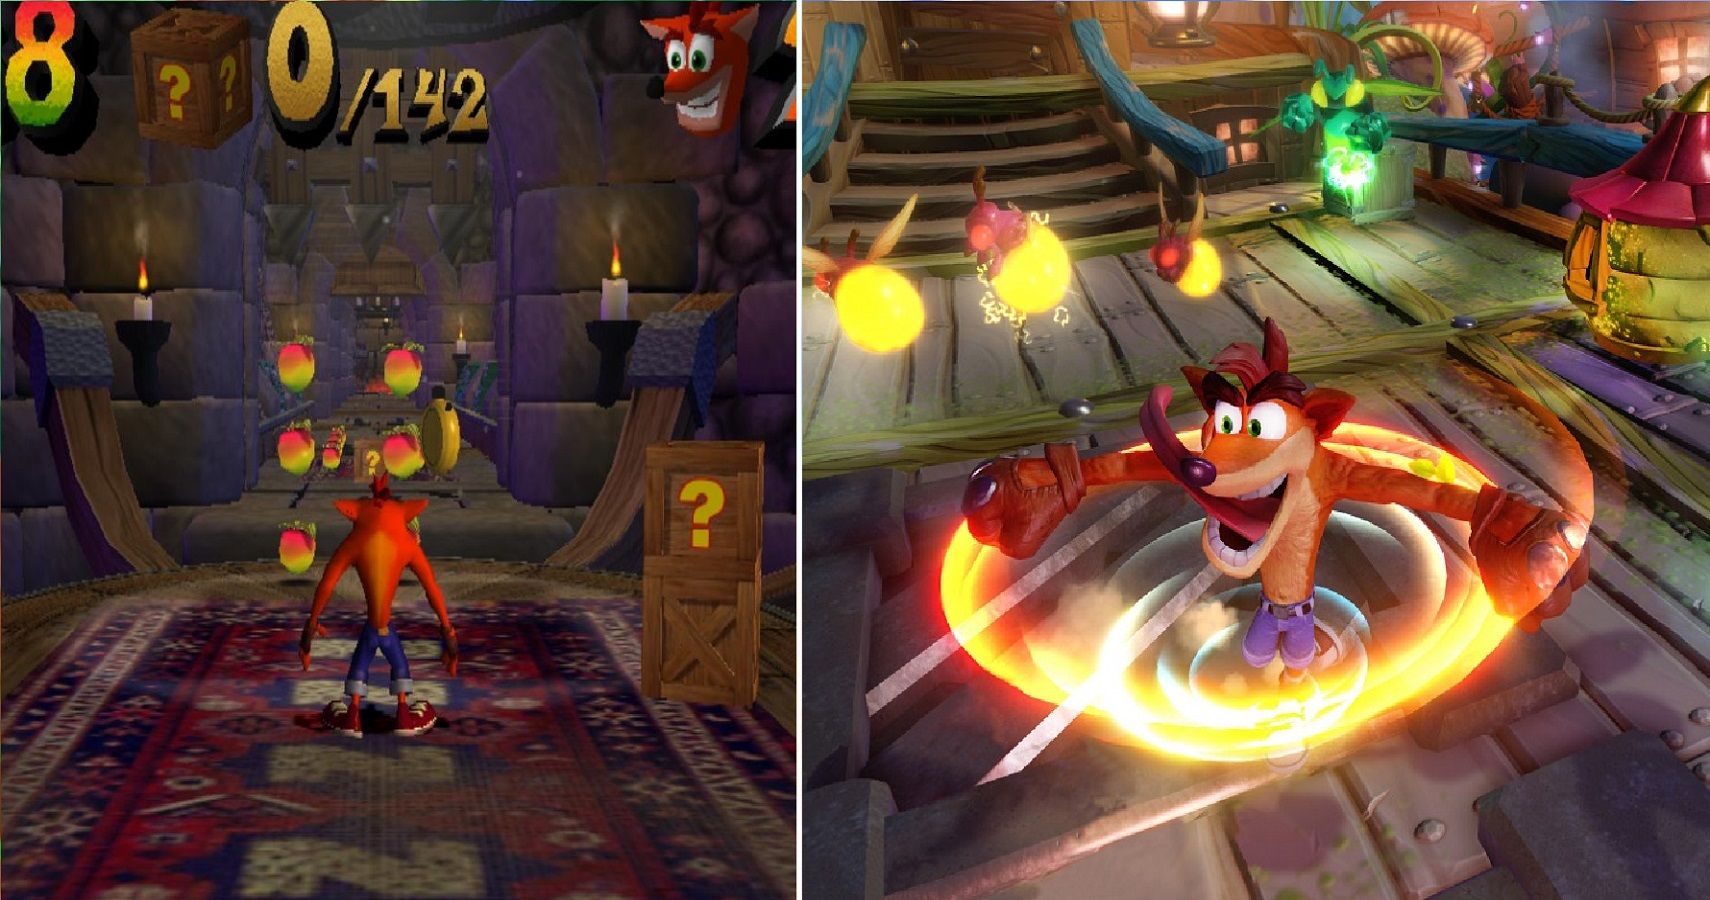 5-reasons-a-crash-bandicoot-wrath-of-cortex-remaster-is-a-good-idea-5-why-we-want-a-new-game